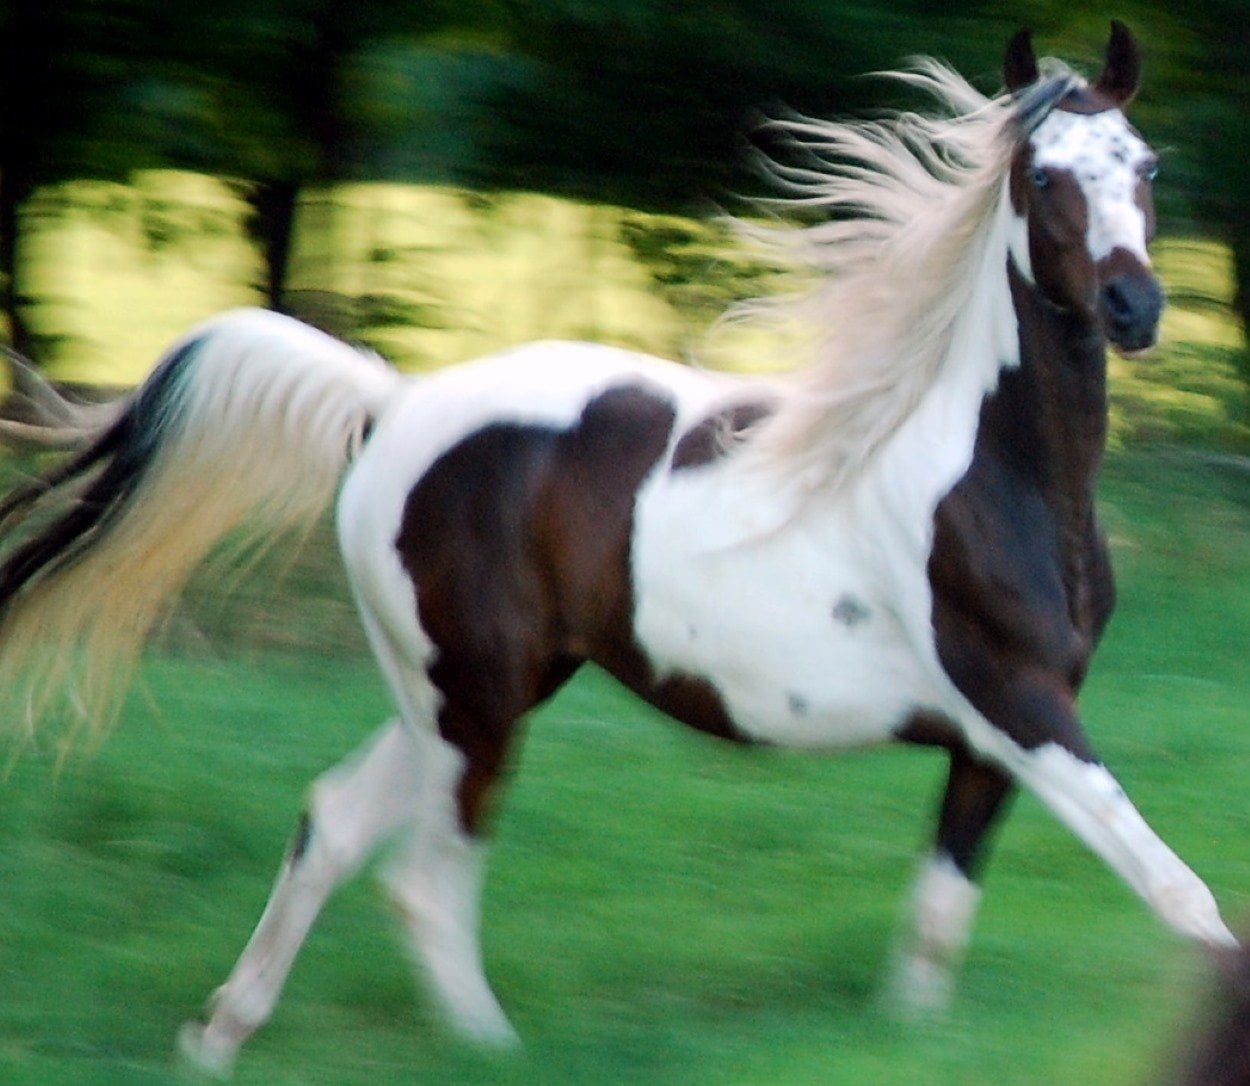 9 Breathtaking Draft Horse Breeds With Long Flowing Manes and